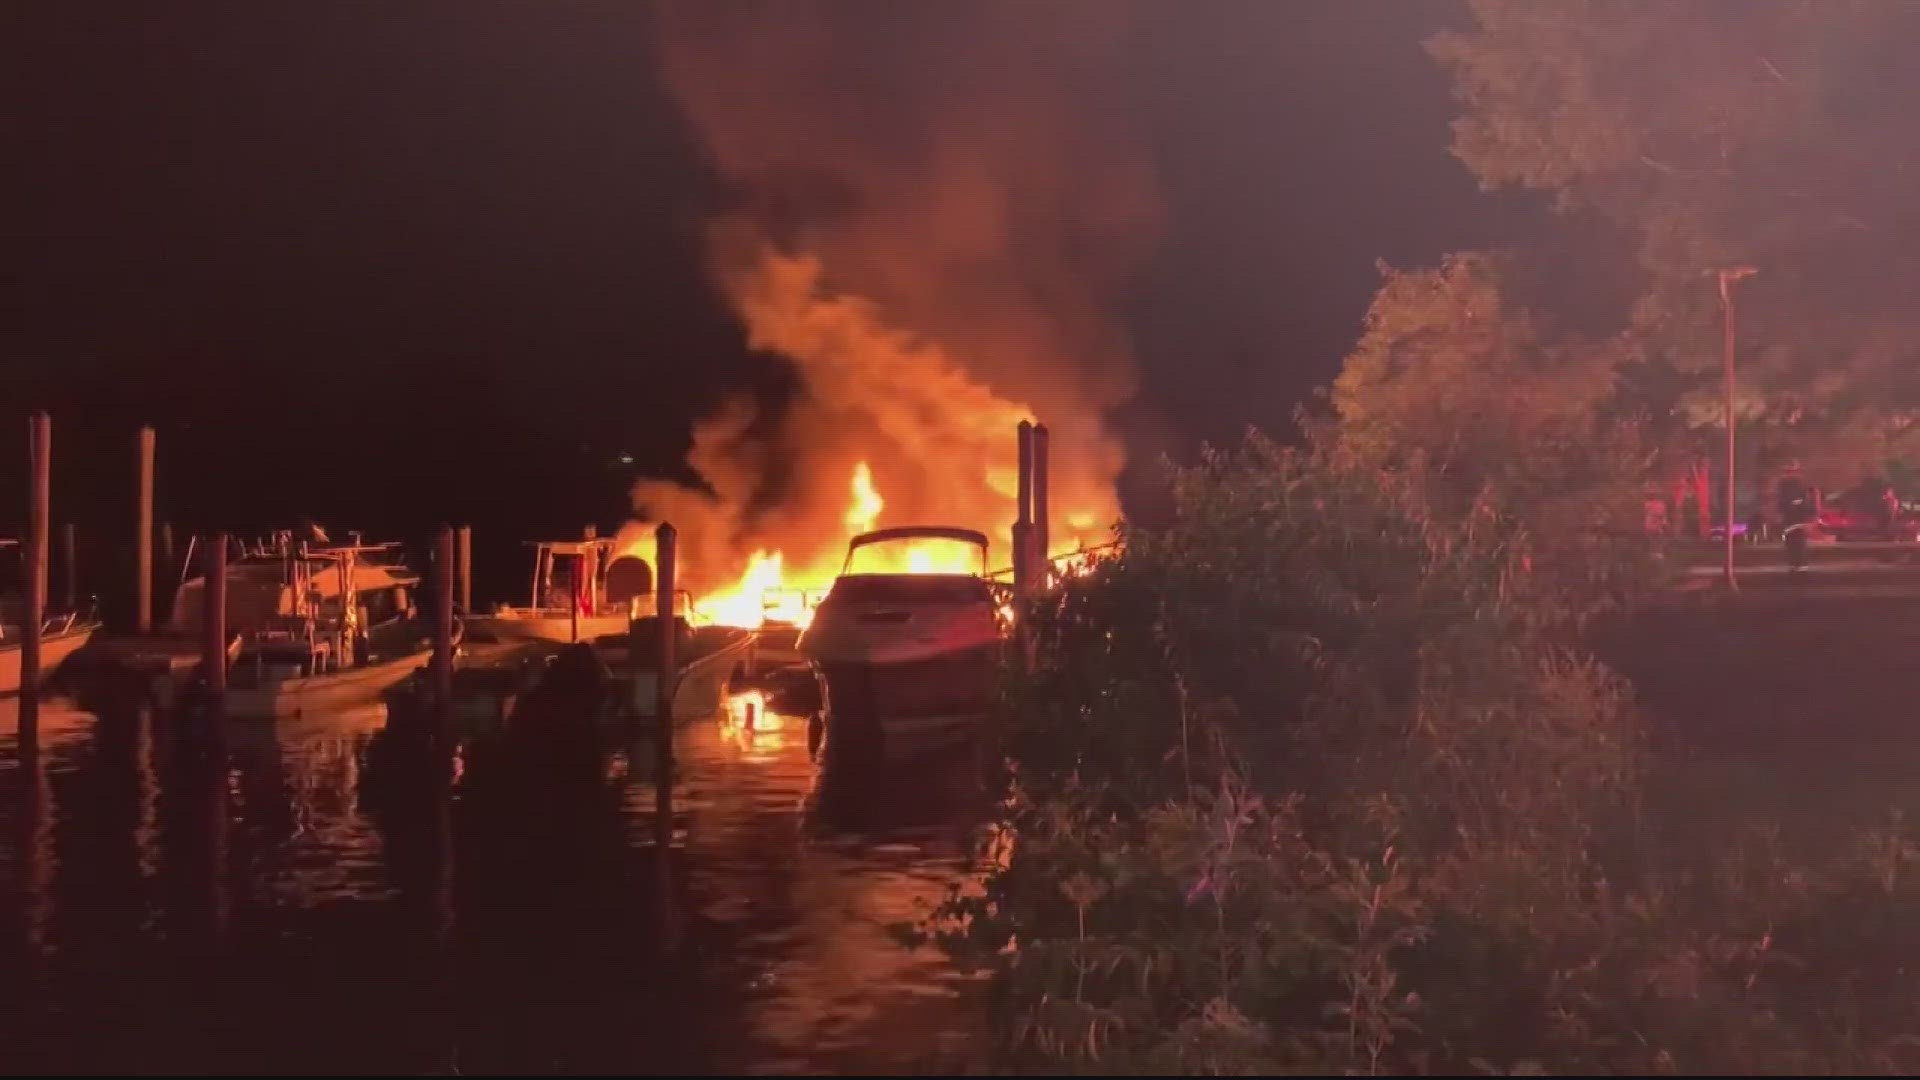 Three boats were severely damaged after a fire broke out at Columbia Island Marina early Sunday morning, according to fire officials.